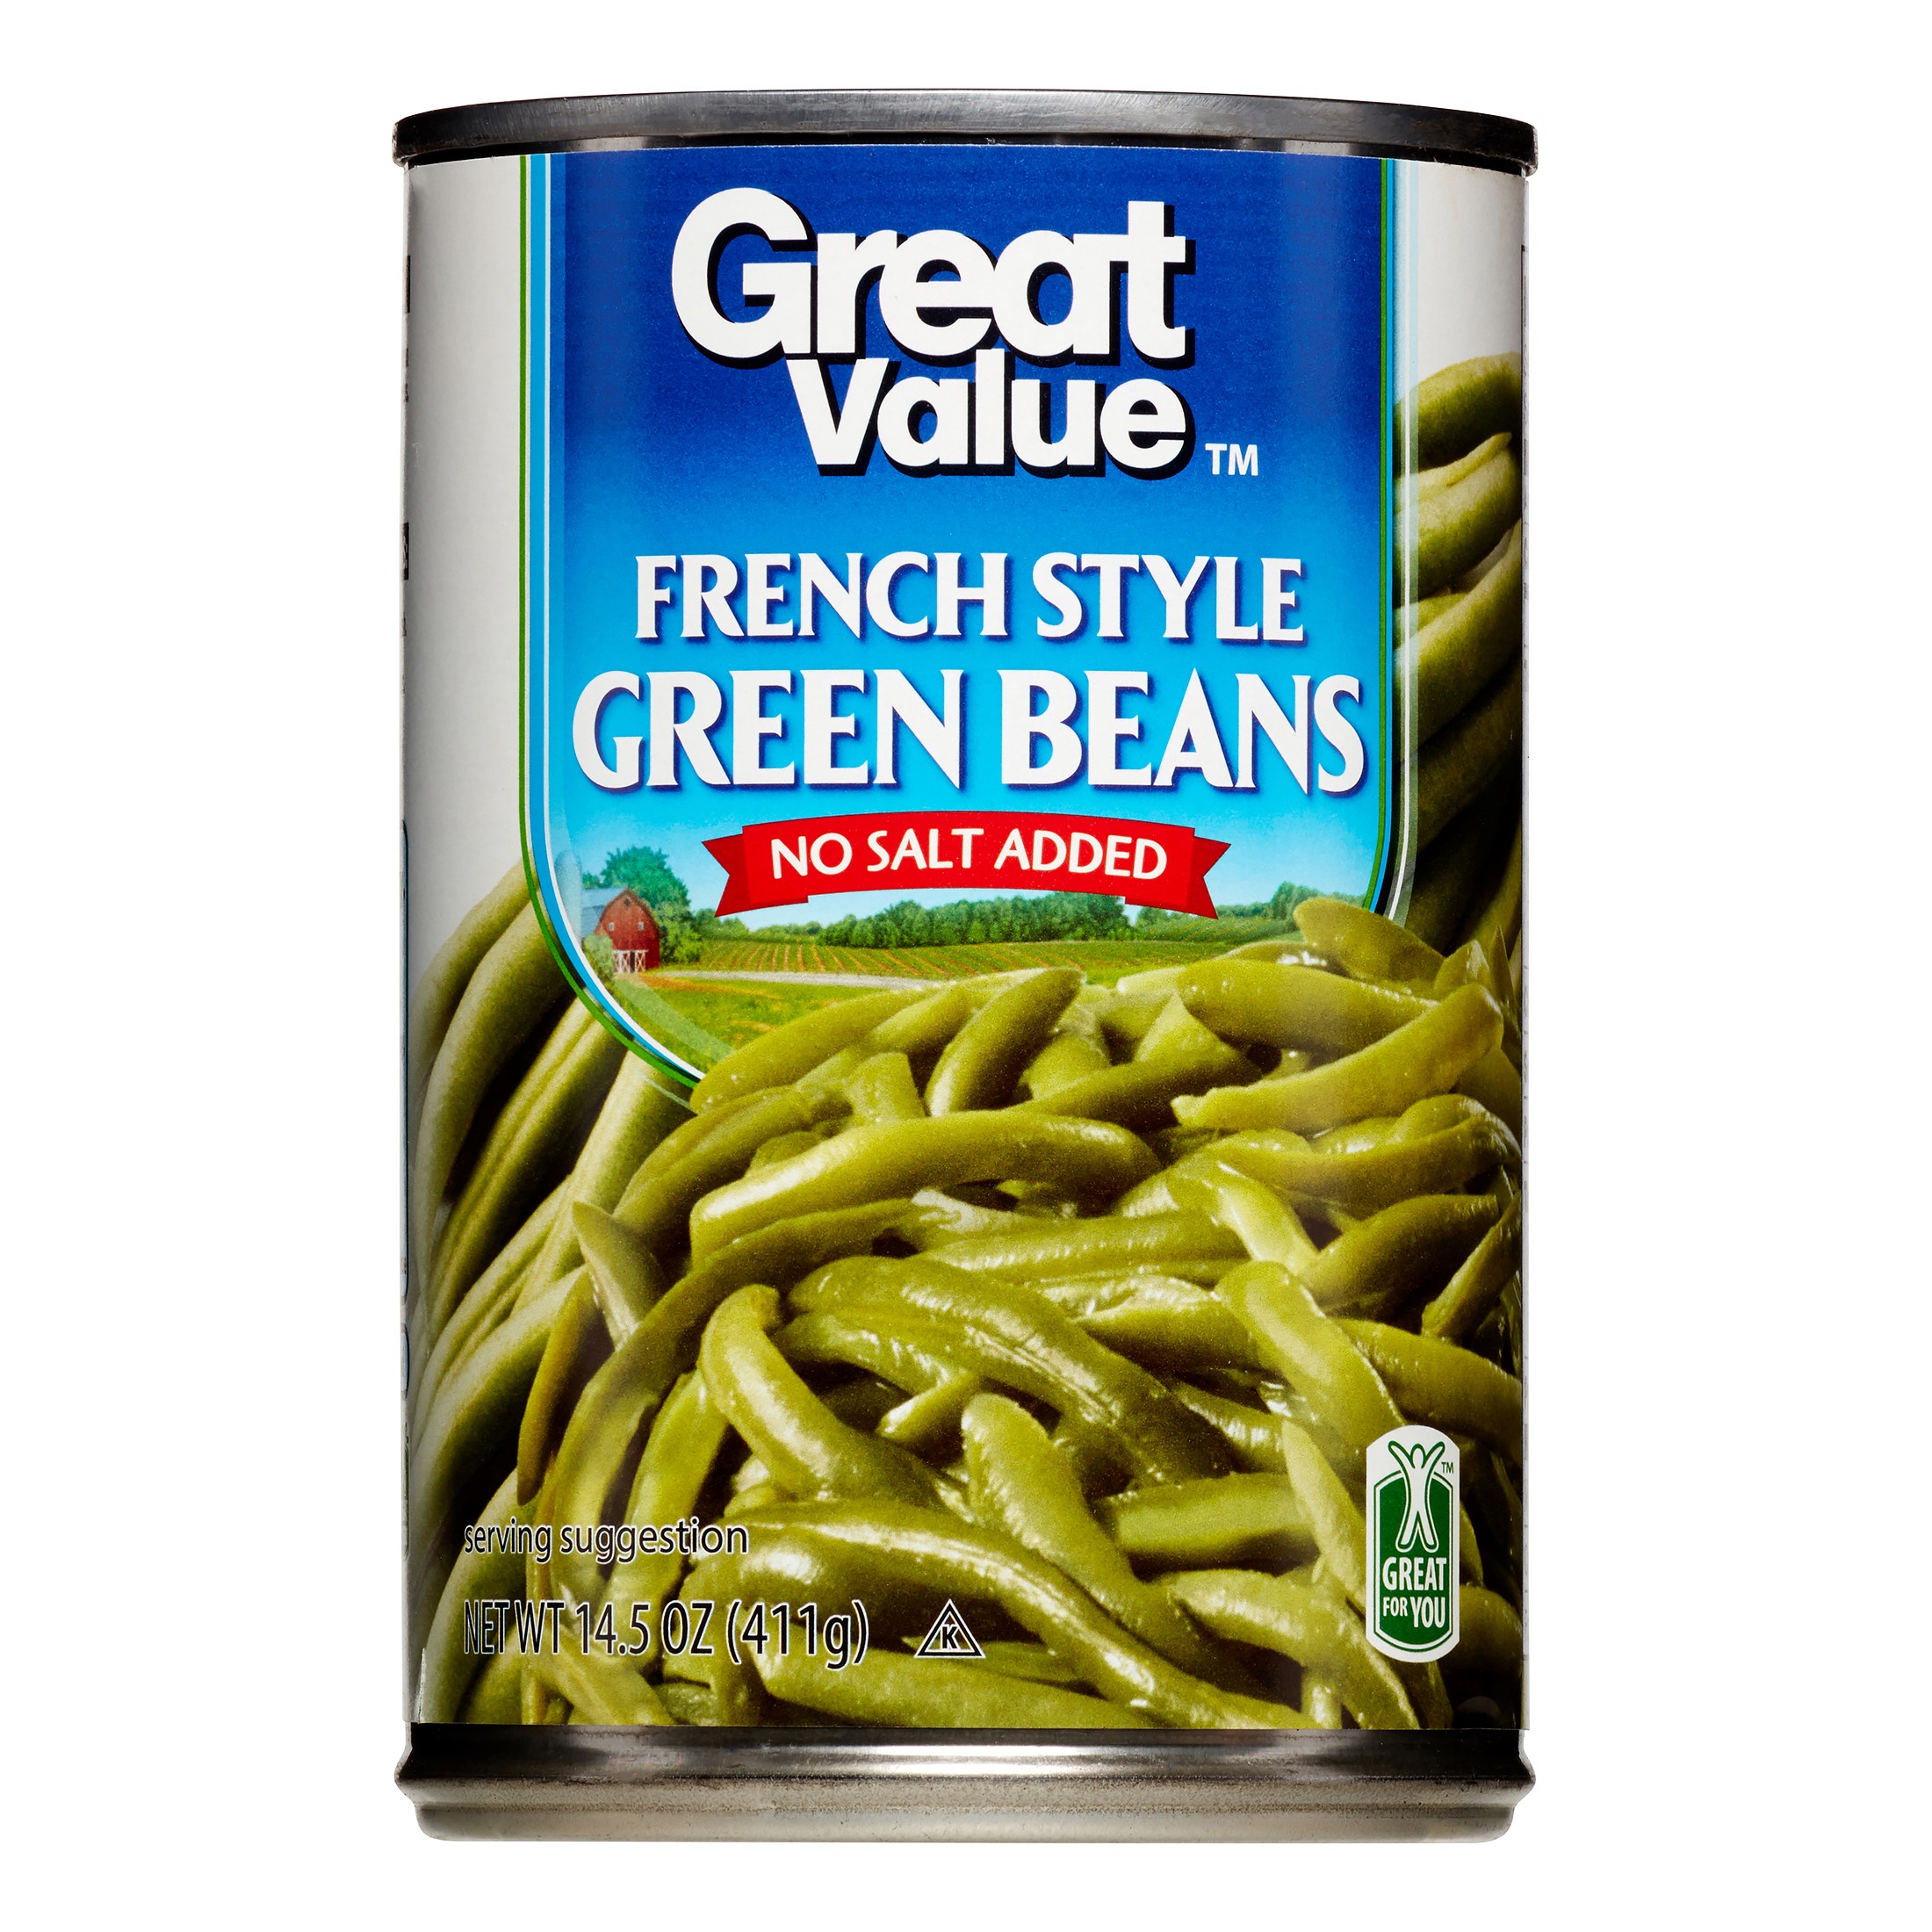 (4 Pack) Great Value French Style Green Beans, No Salt, 14.5 Oz Image